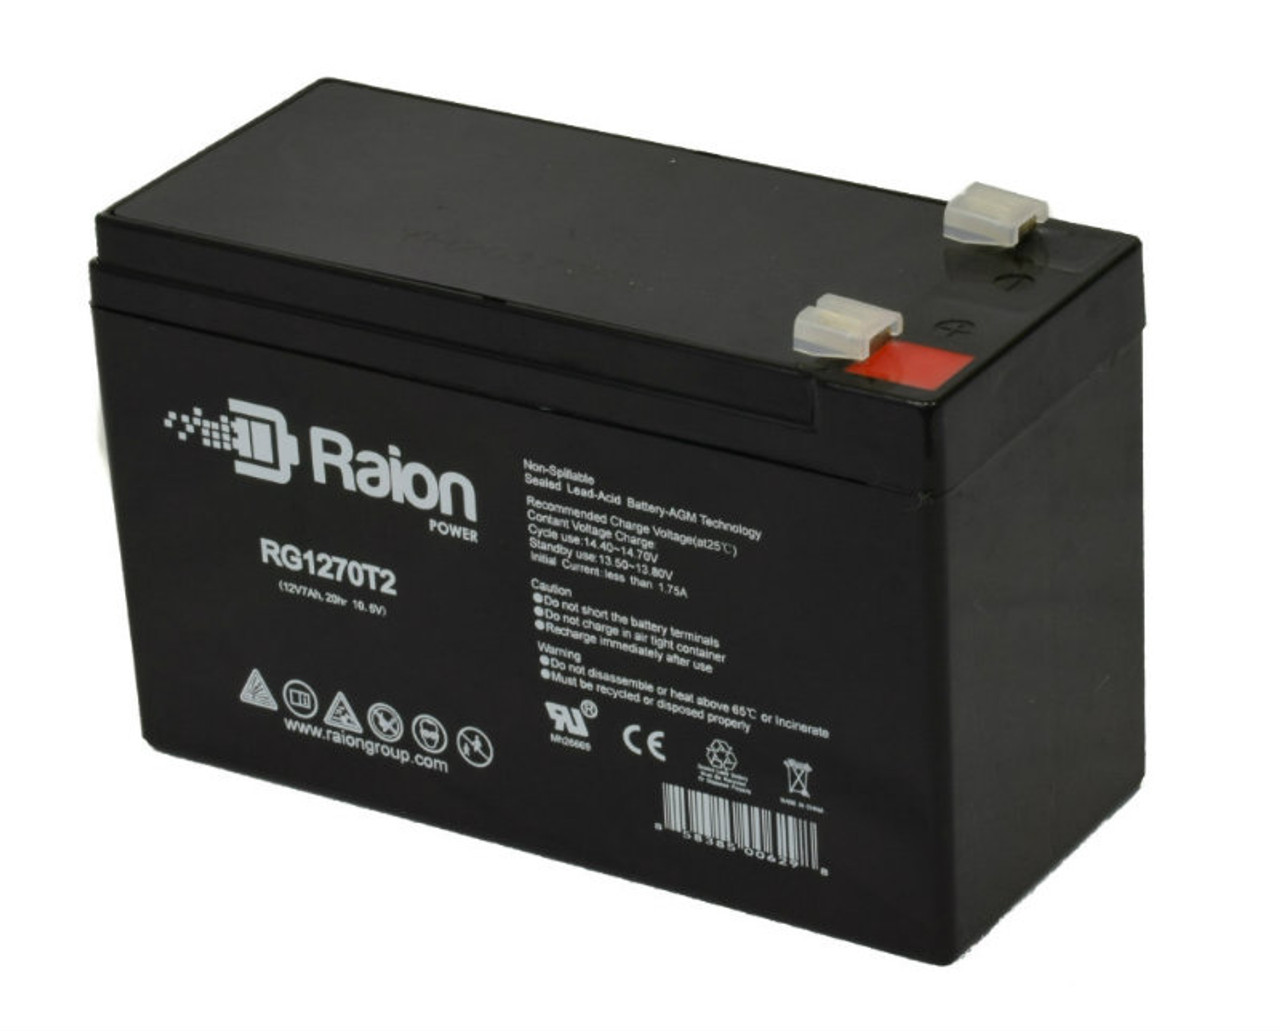 Raion Power RG1270T1 12V 7Ah Non-Spillable Replacement Battery for Baace CB7-12B F1